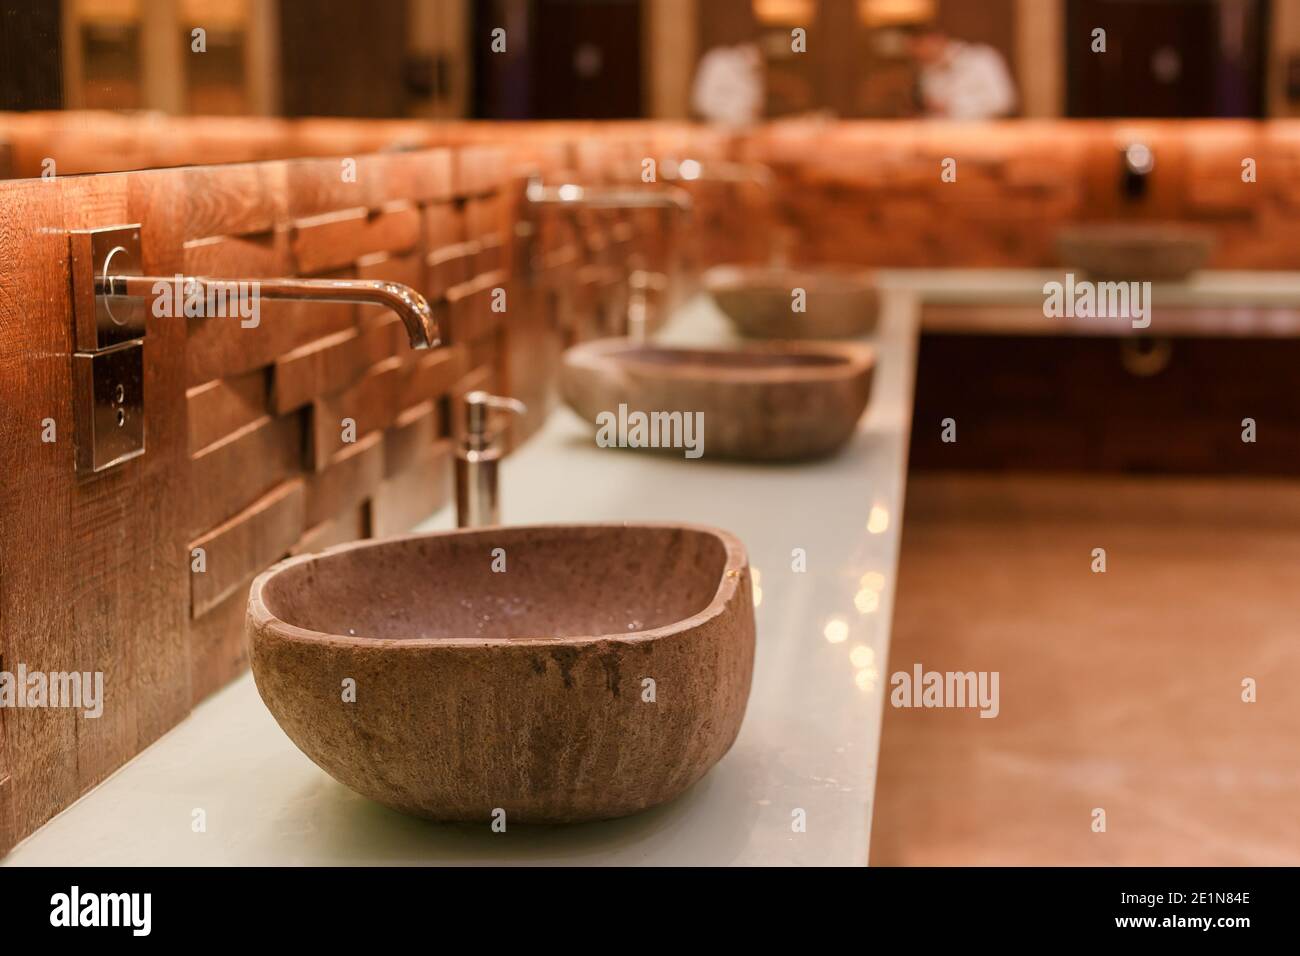 Stylish sink made of light natural stone. Bathroom with stone washbasin on a wooden top in a tropical loft style. Stock Photo